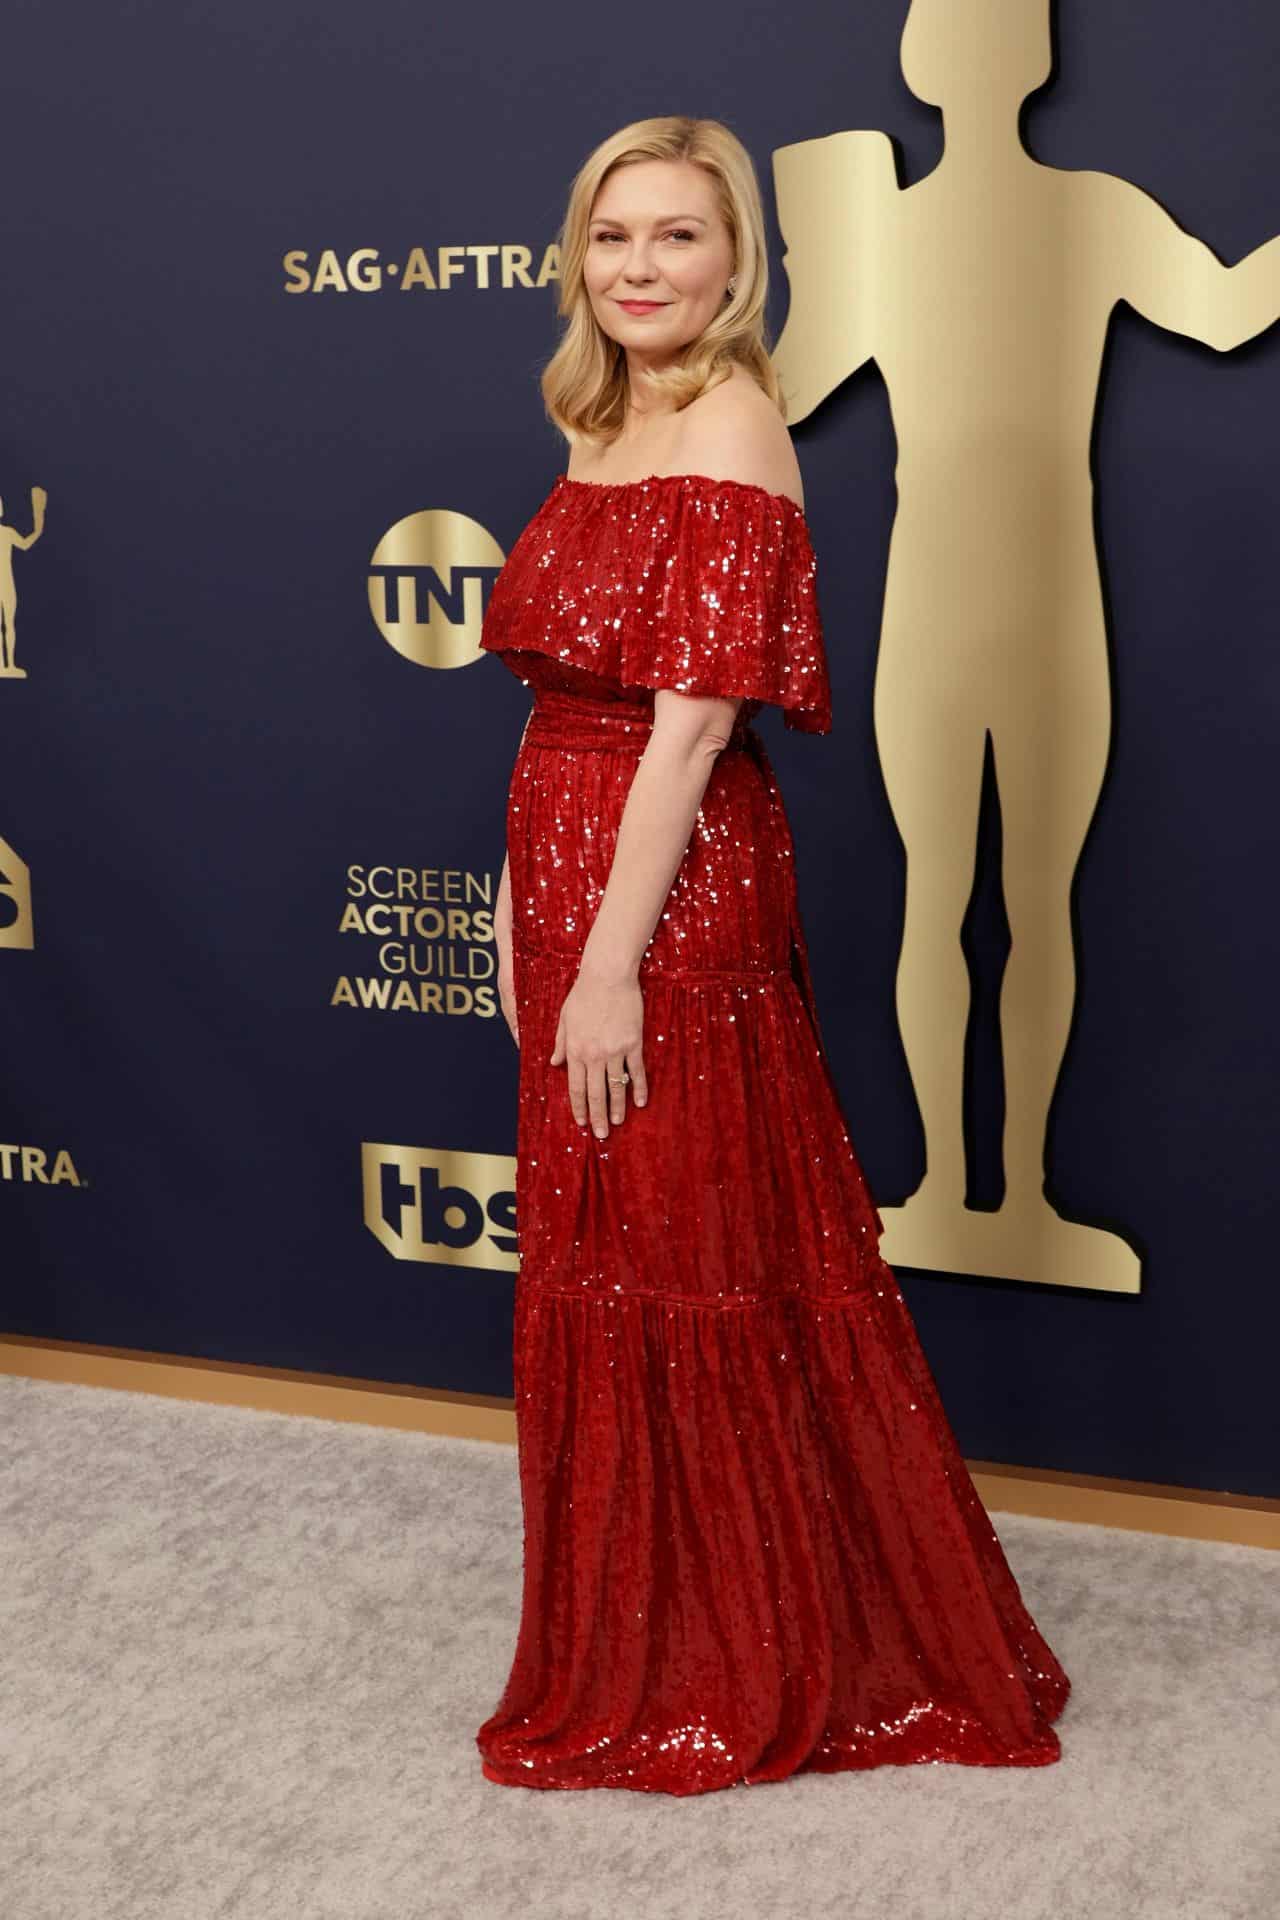 Kirsten Dunst Looks Stunning in a Sparkly Red Gown at the 2022 SAG Awards